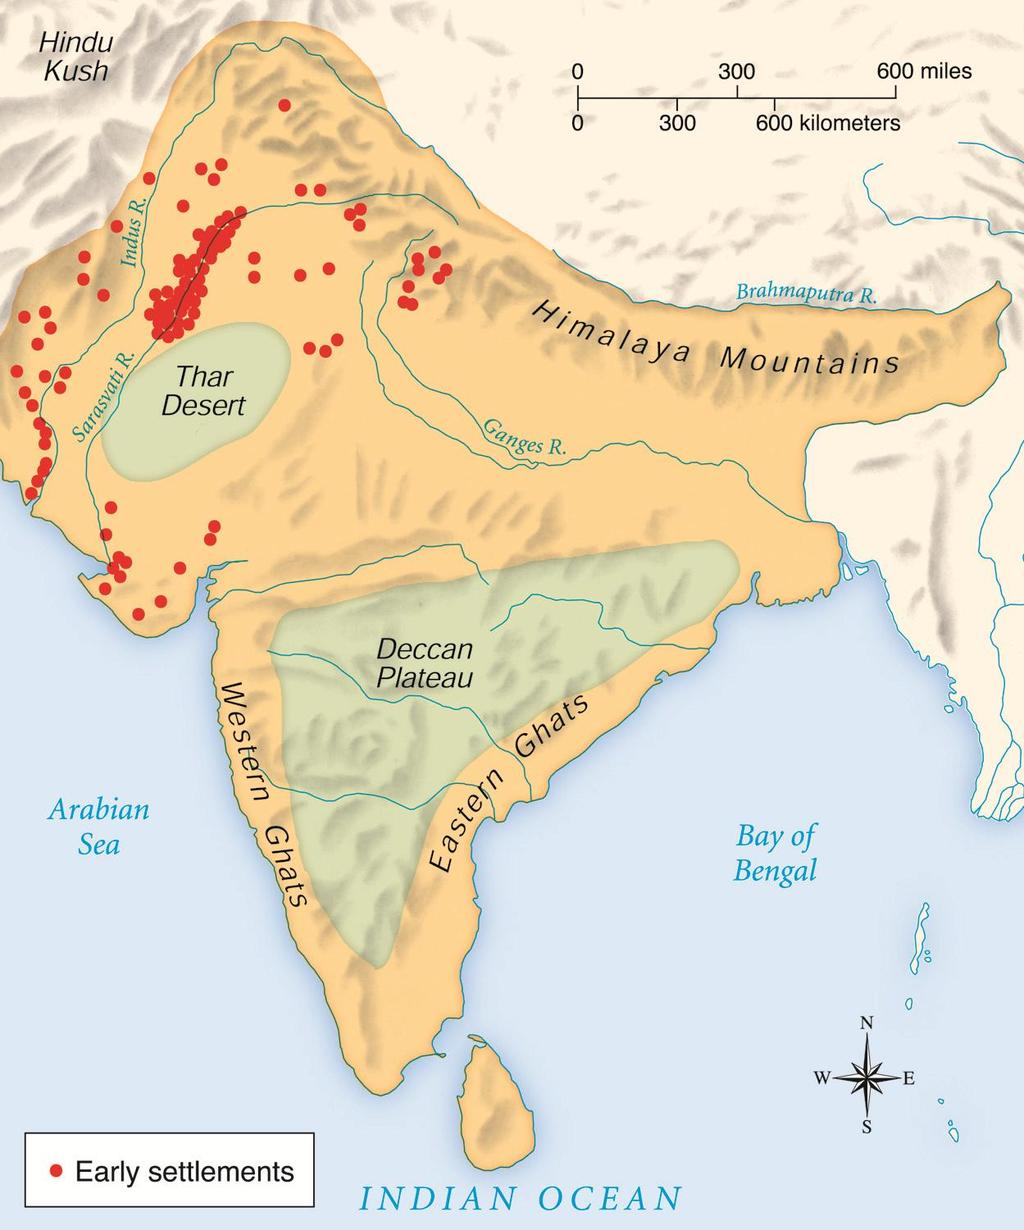 Ancient India Challenge #3 1) What continent is India a part of? 2) Which bodies of water surround India? a) b) c) 3) In ancient Egypt, what important place did people settle near?